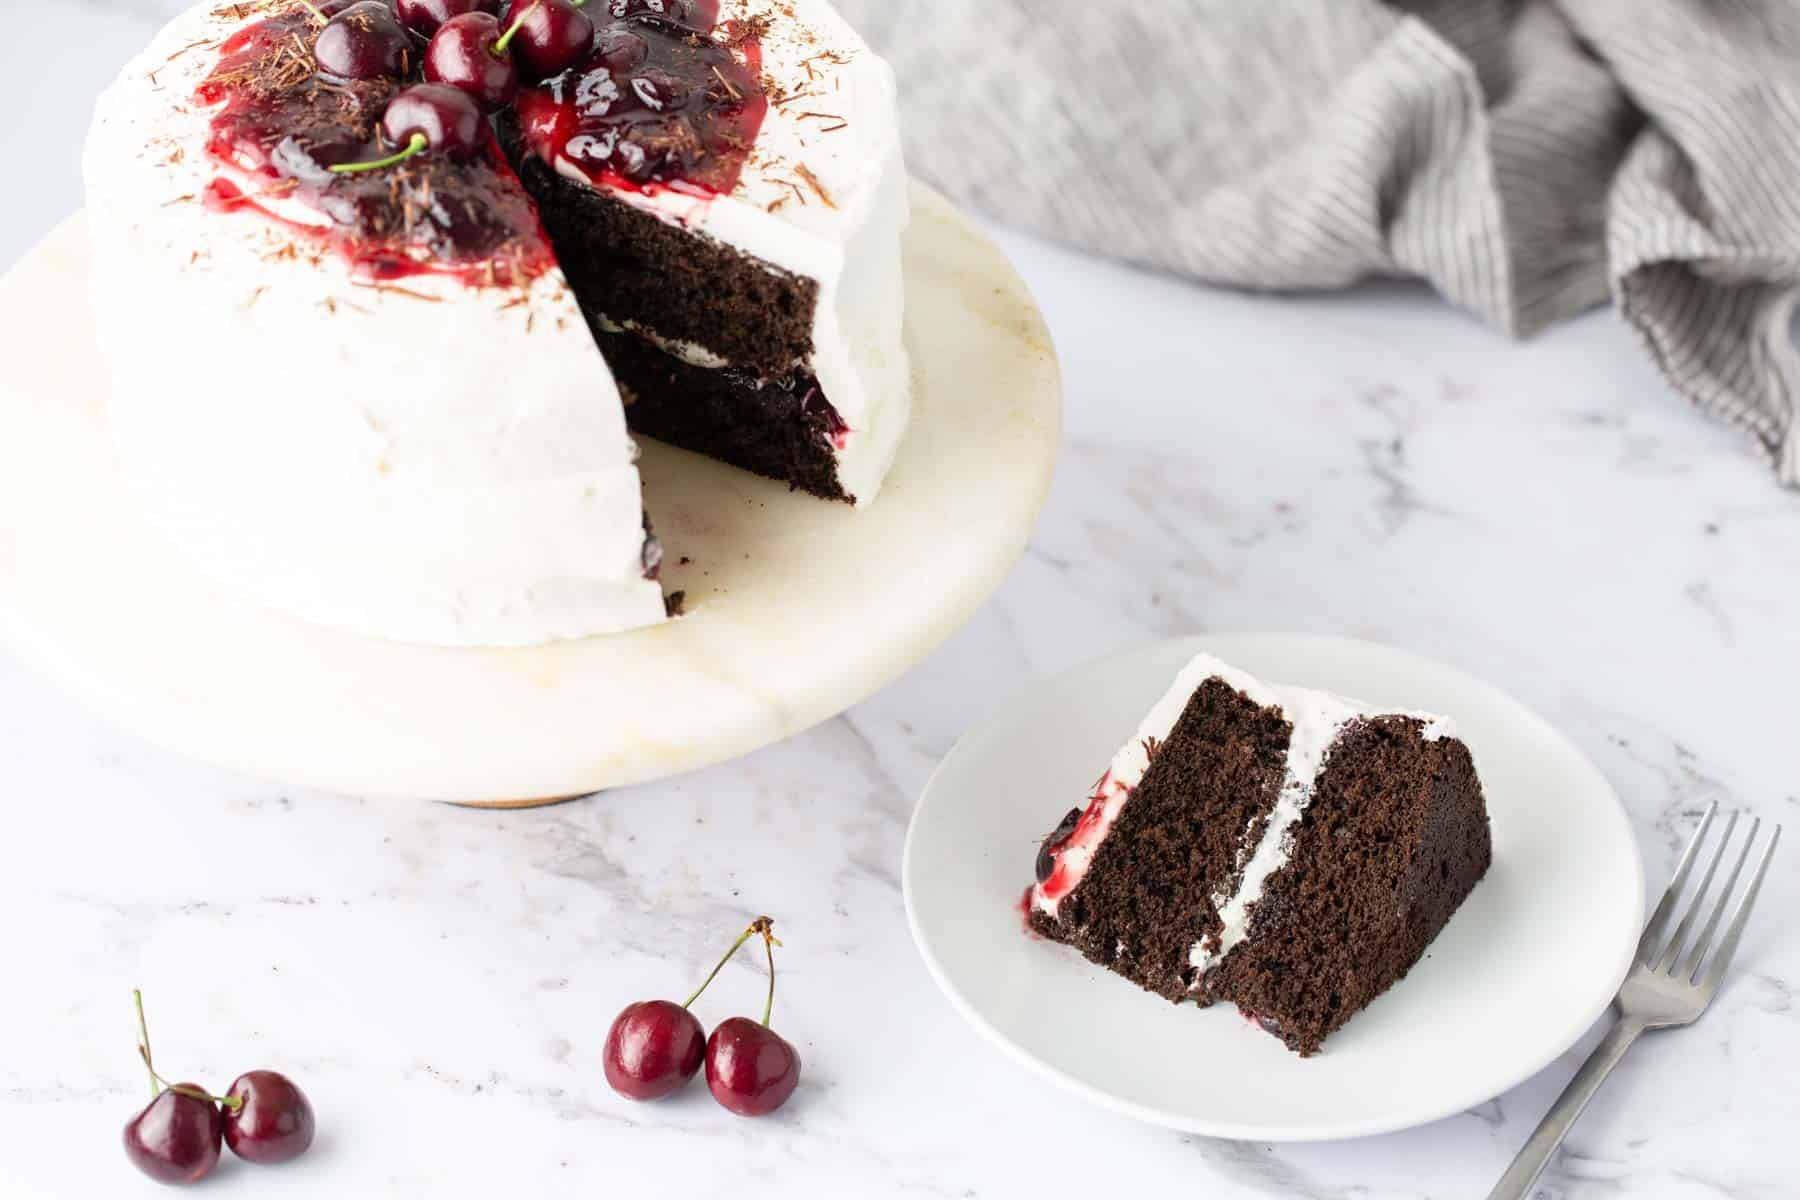 A chocolate cake with white frosting and cherries on top sits on a marble stand with a slice cut out and placed on a plate beside it. A few cherries are scattered on the marble surface.